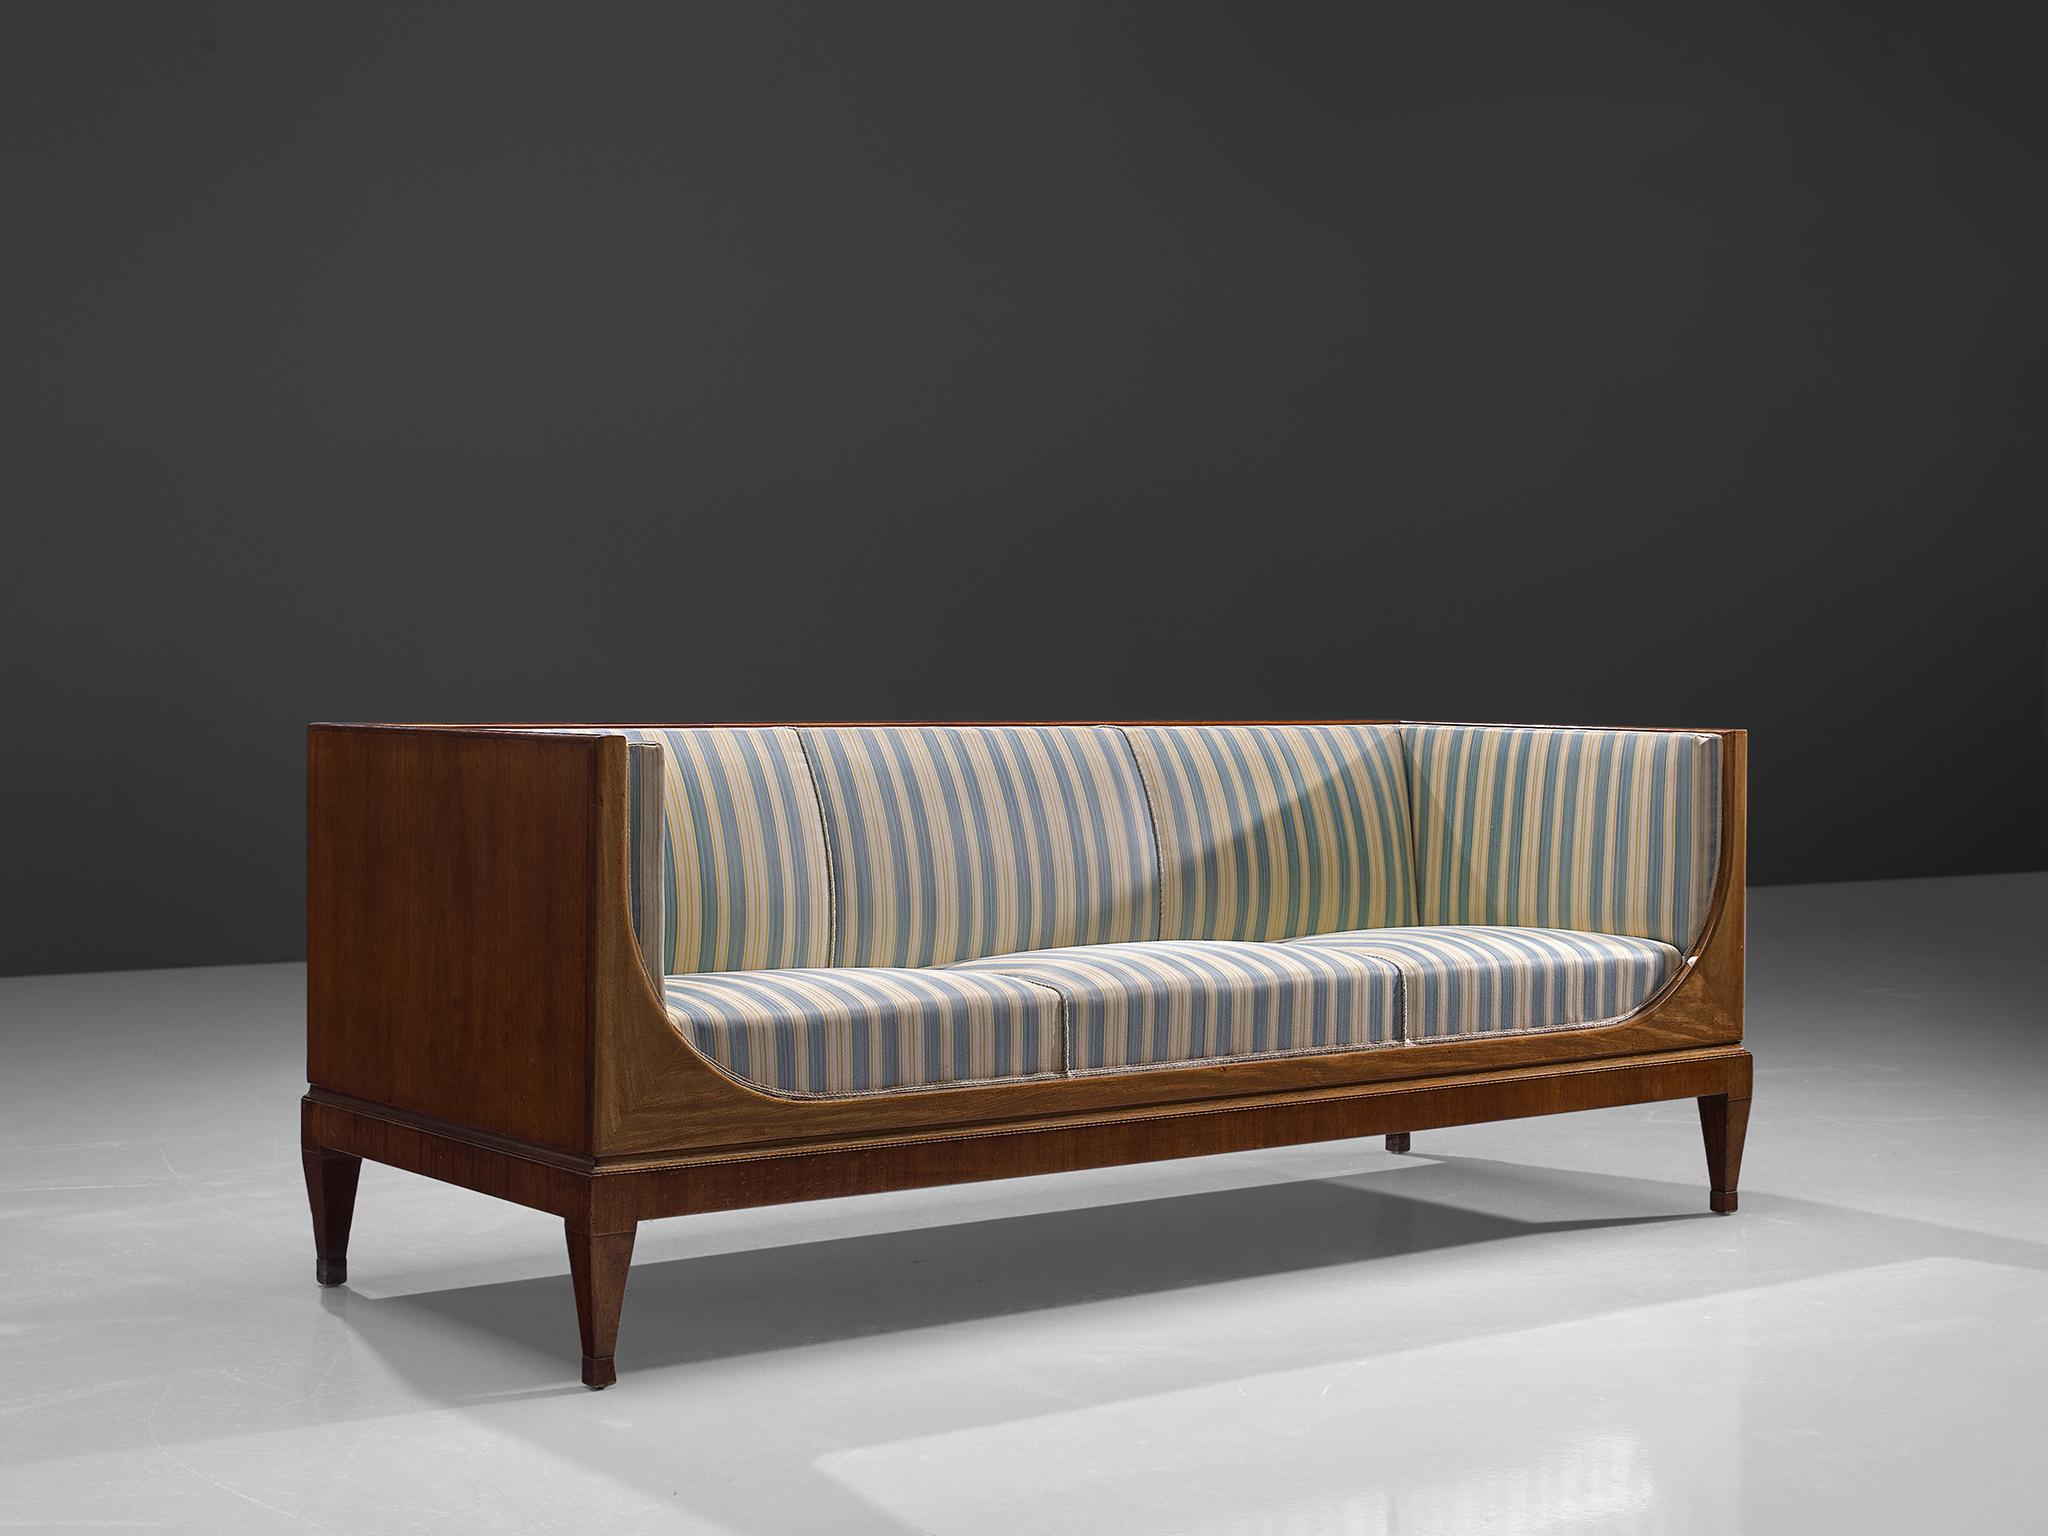 Frits Henningsen, sofa, mahogany and blue and white striped fabric, Denmark, 1930s.

This Classic sofa was designed and produced by master cabinet maker Frits Henningsen, circa 1930s. The basic design is well balanced, showing an interesting